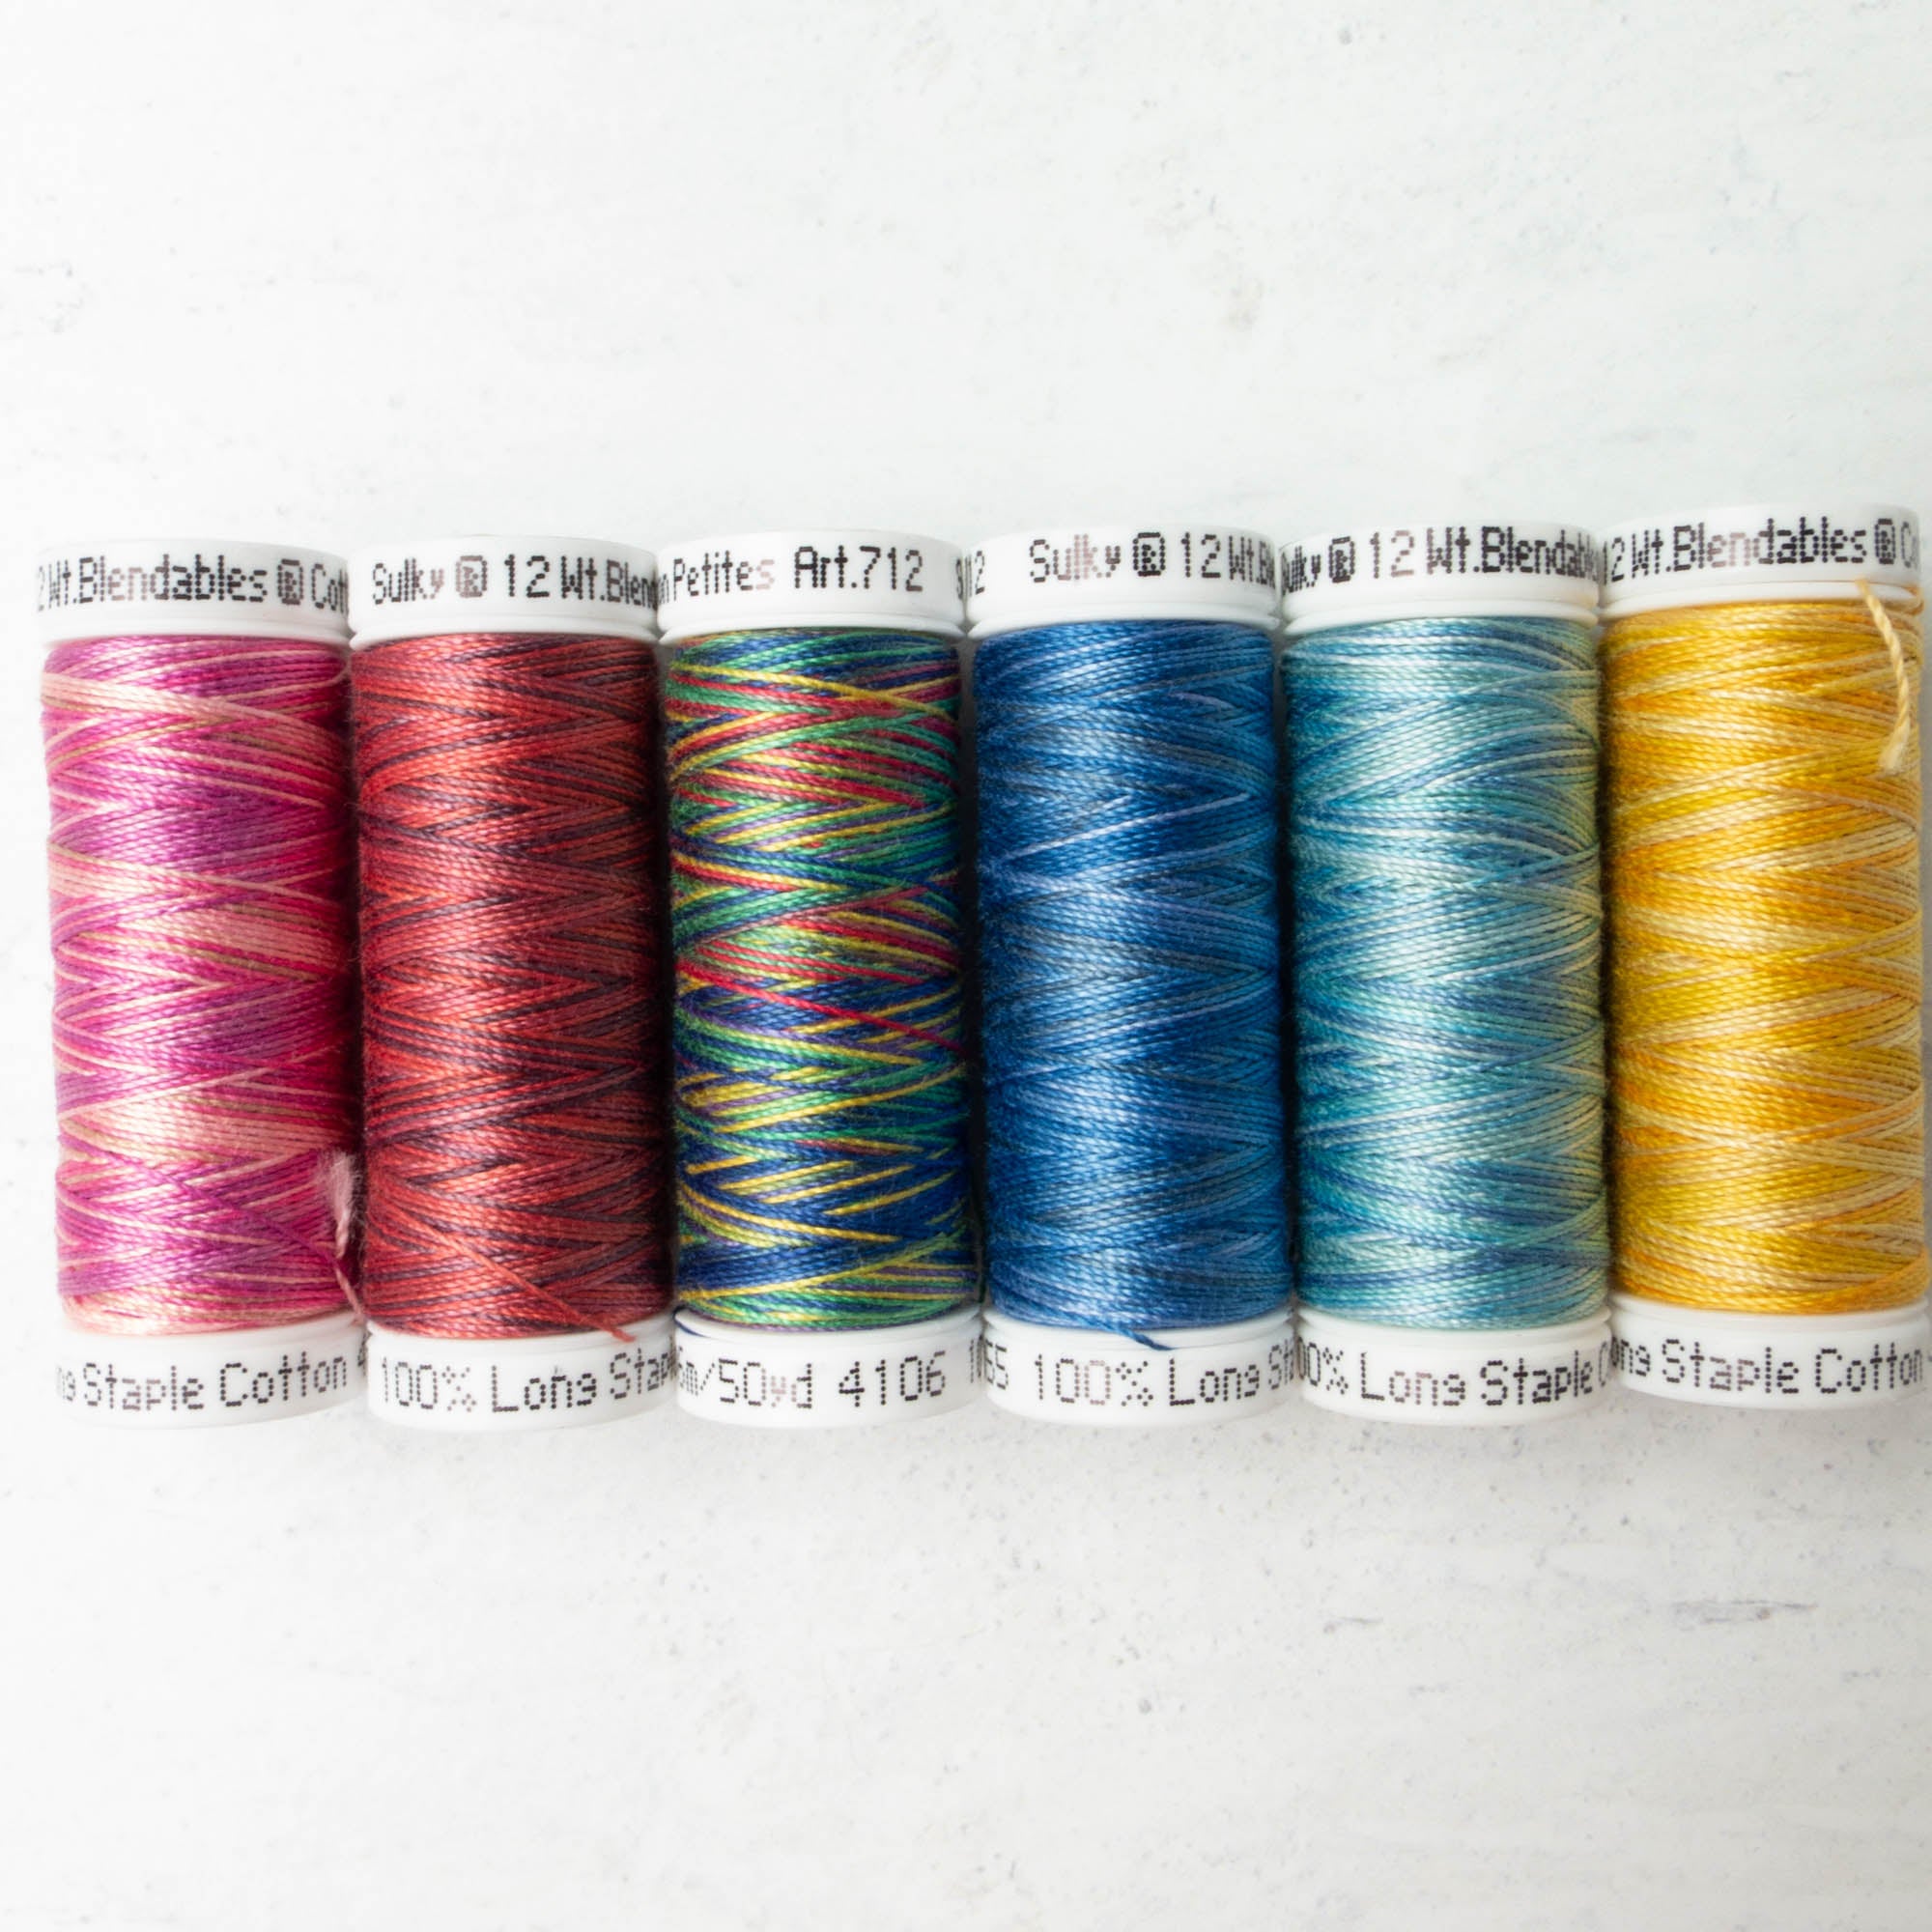 Embroidery Thread Review – 12 wt. Sulky Cotton Petites - Shiny